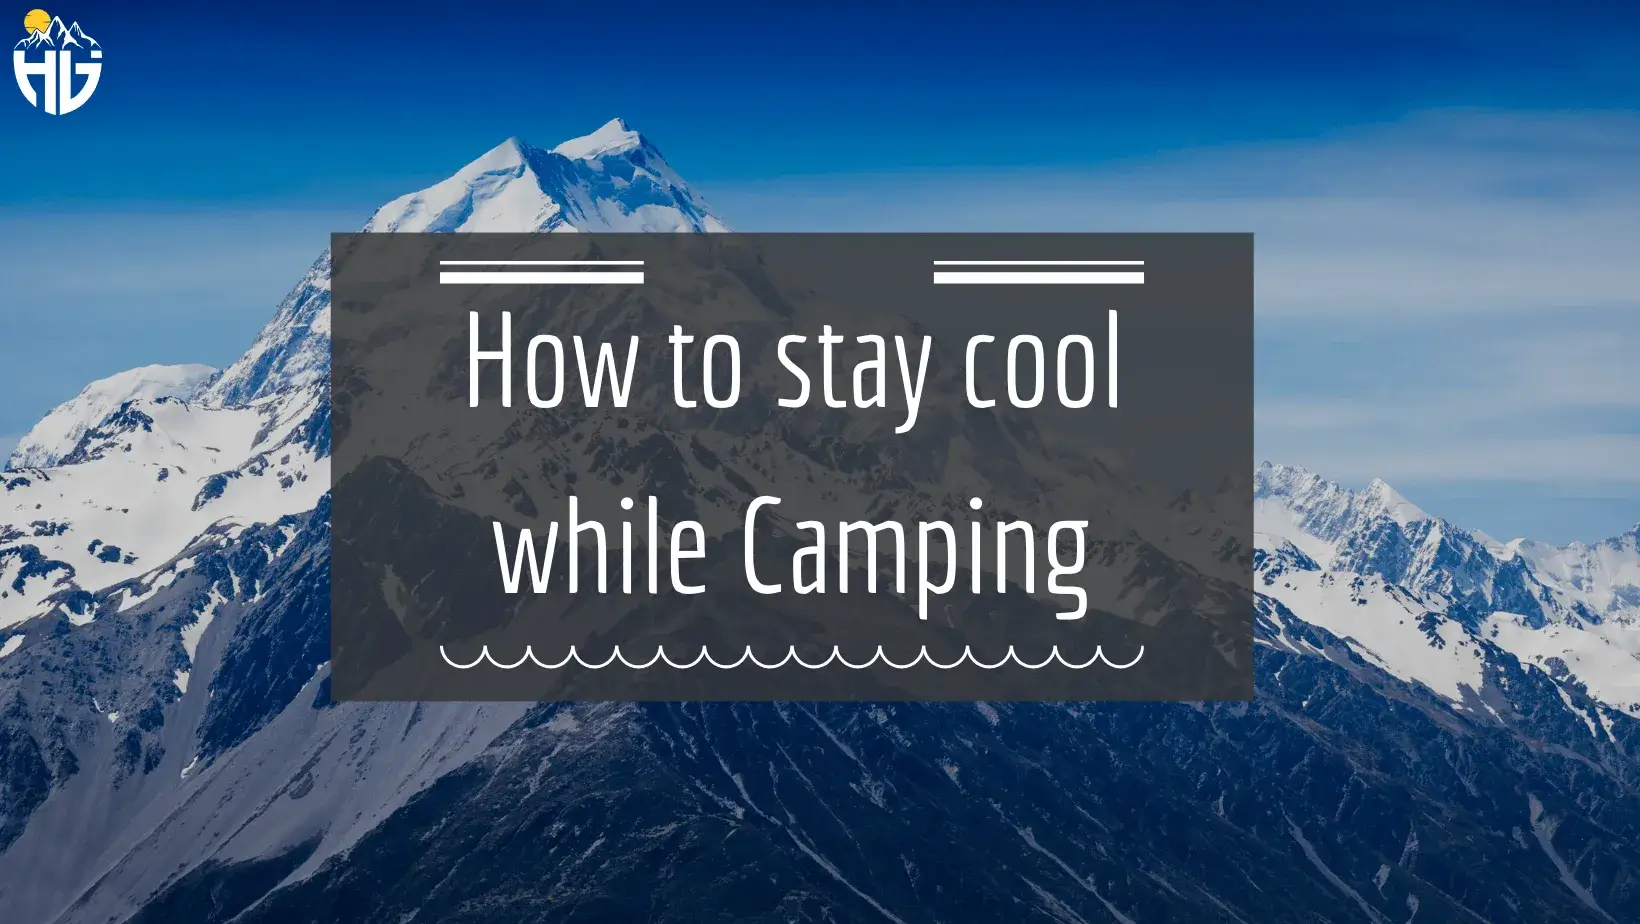 How to stay cool while Camping